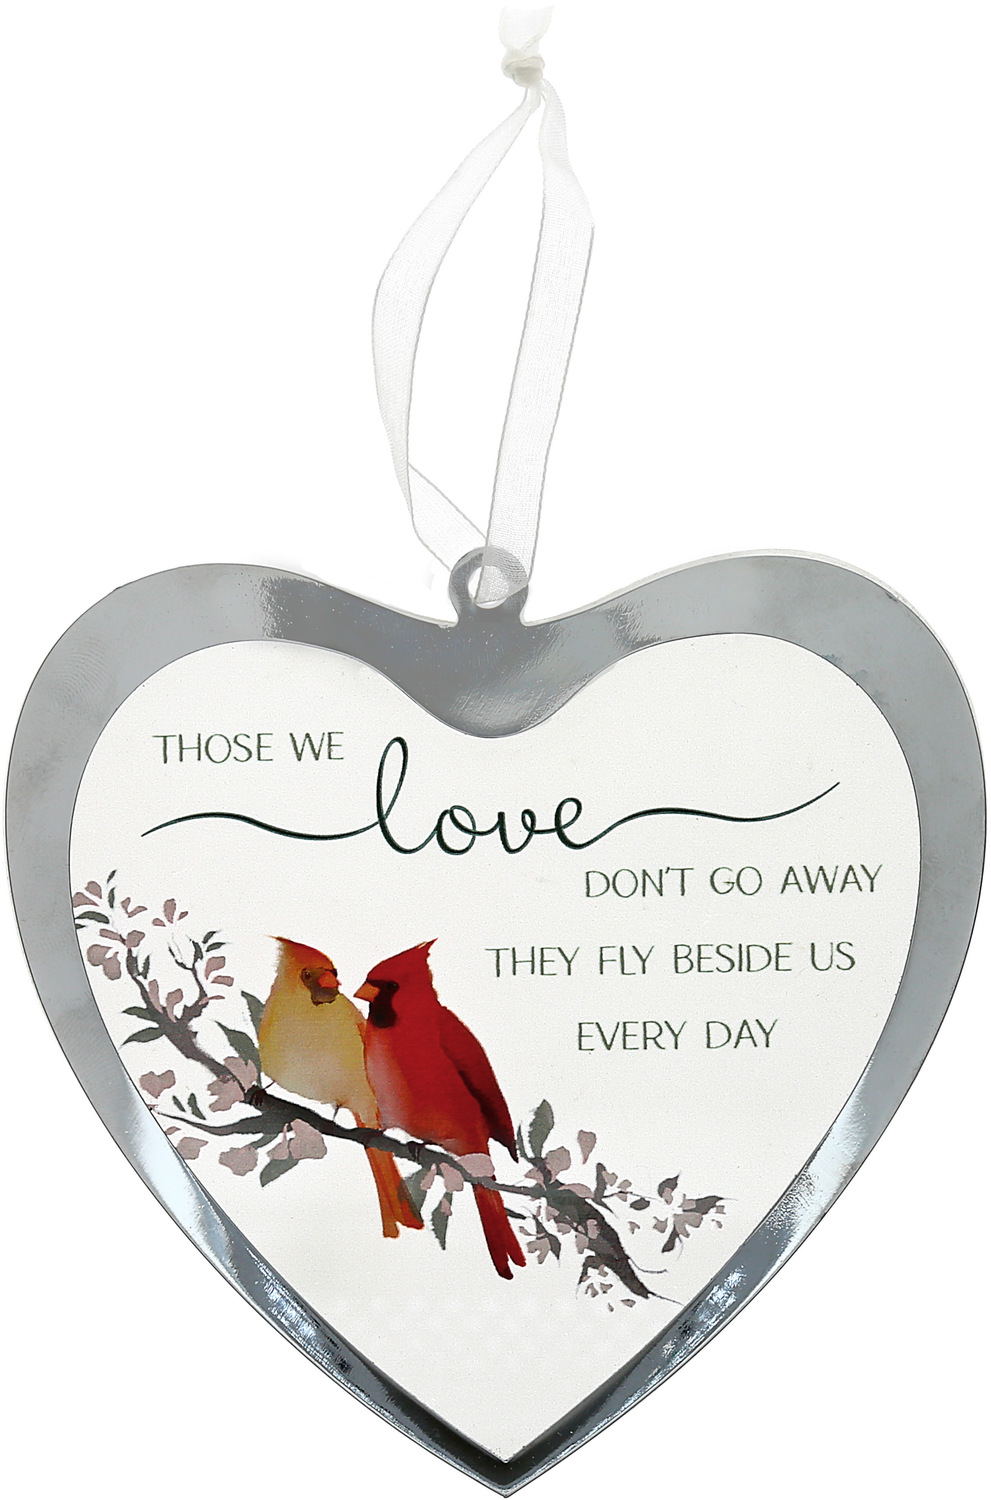 Those We Love by Always by Your Side - Those We Love - 4.75" Mirrored Glass Ornament